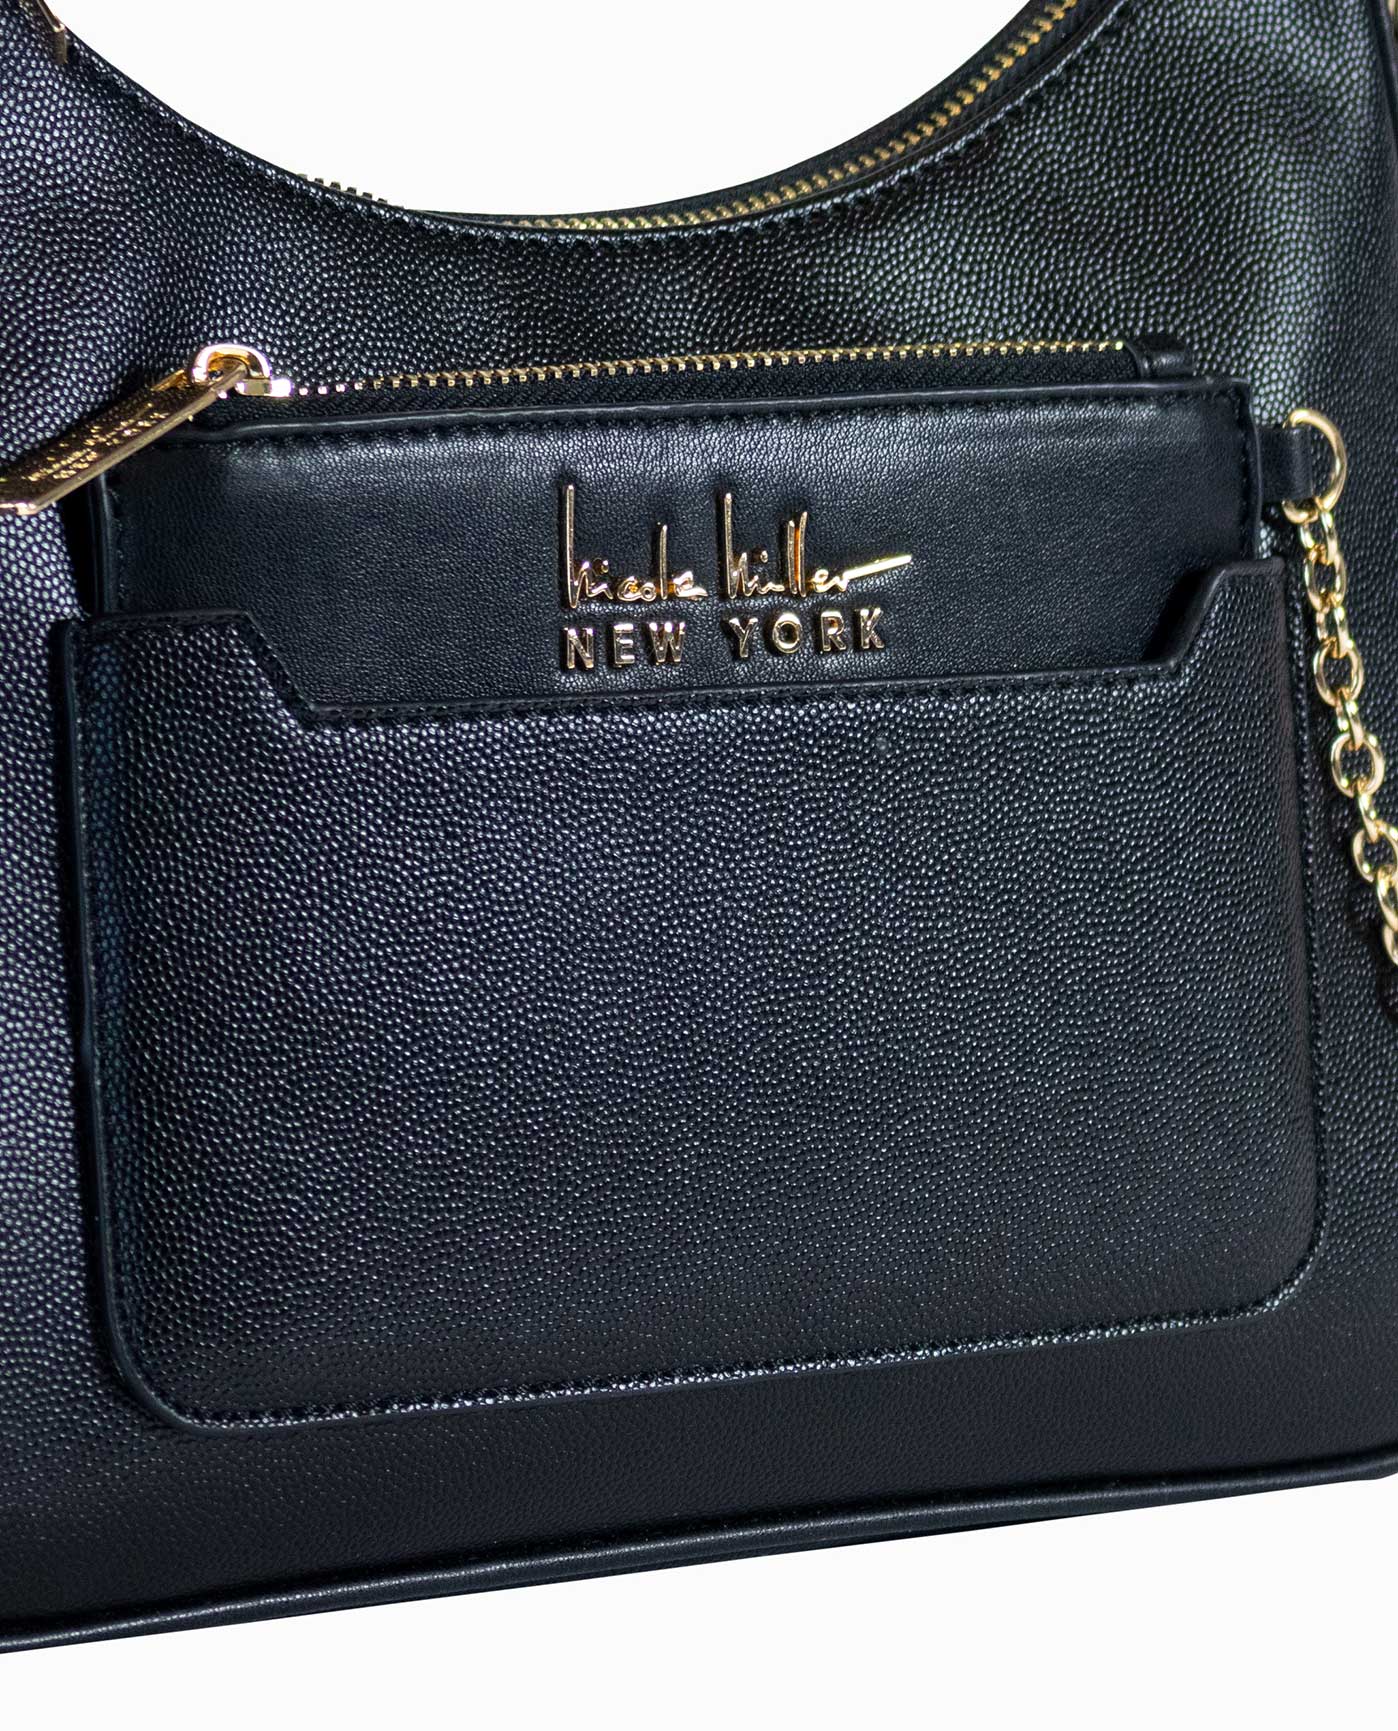 This Season's 'It' Bag Is…Two Bags? - WSJ